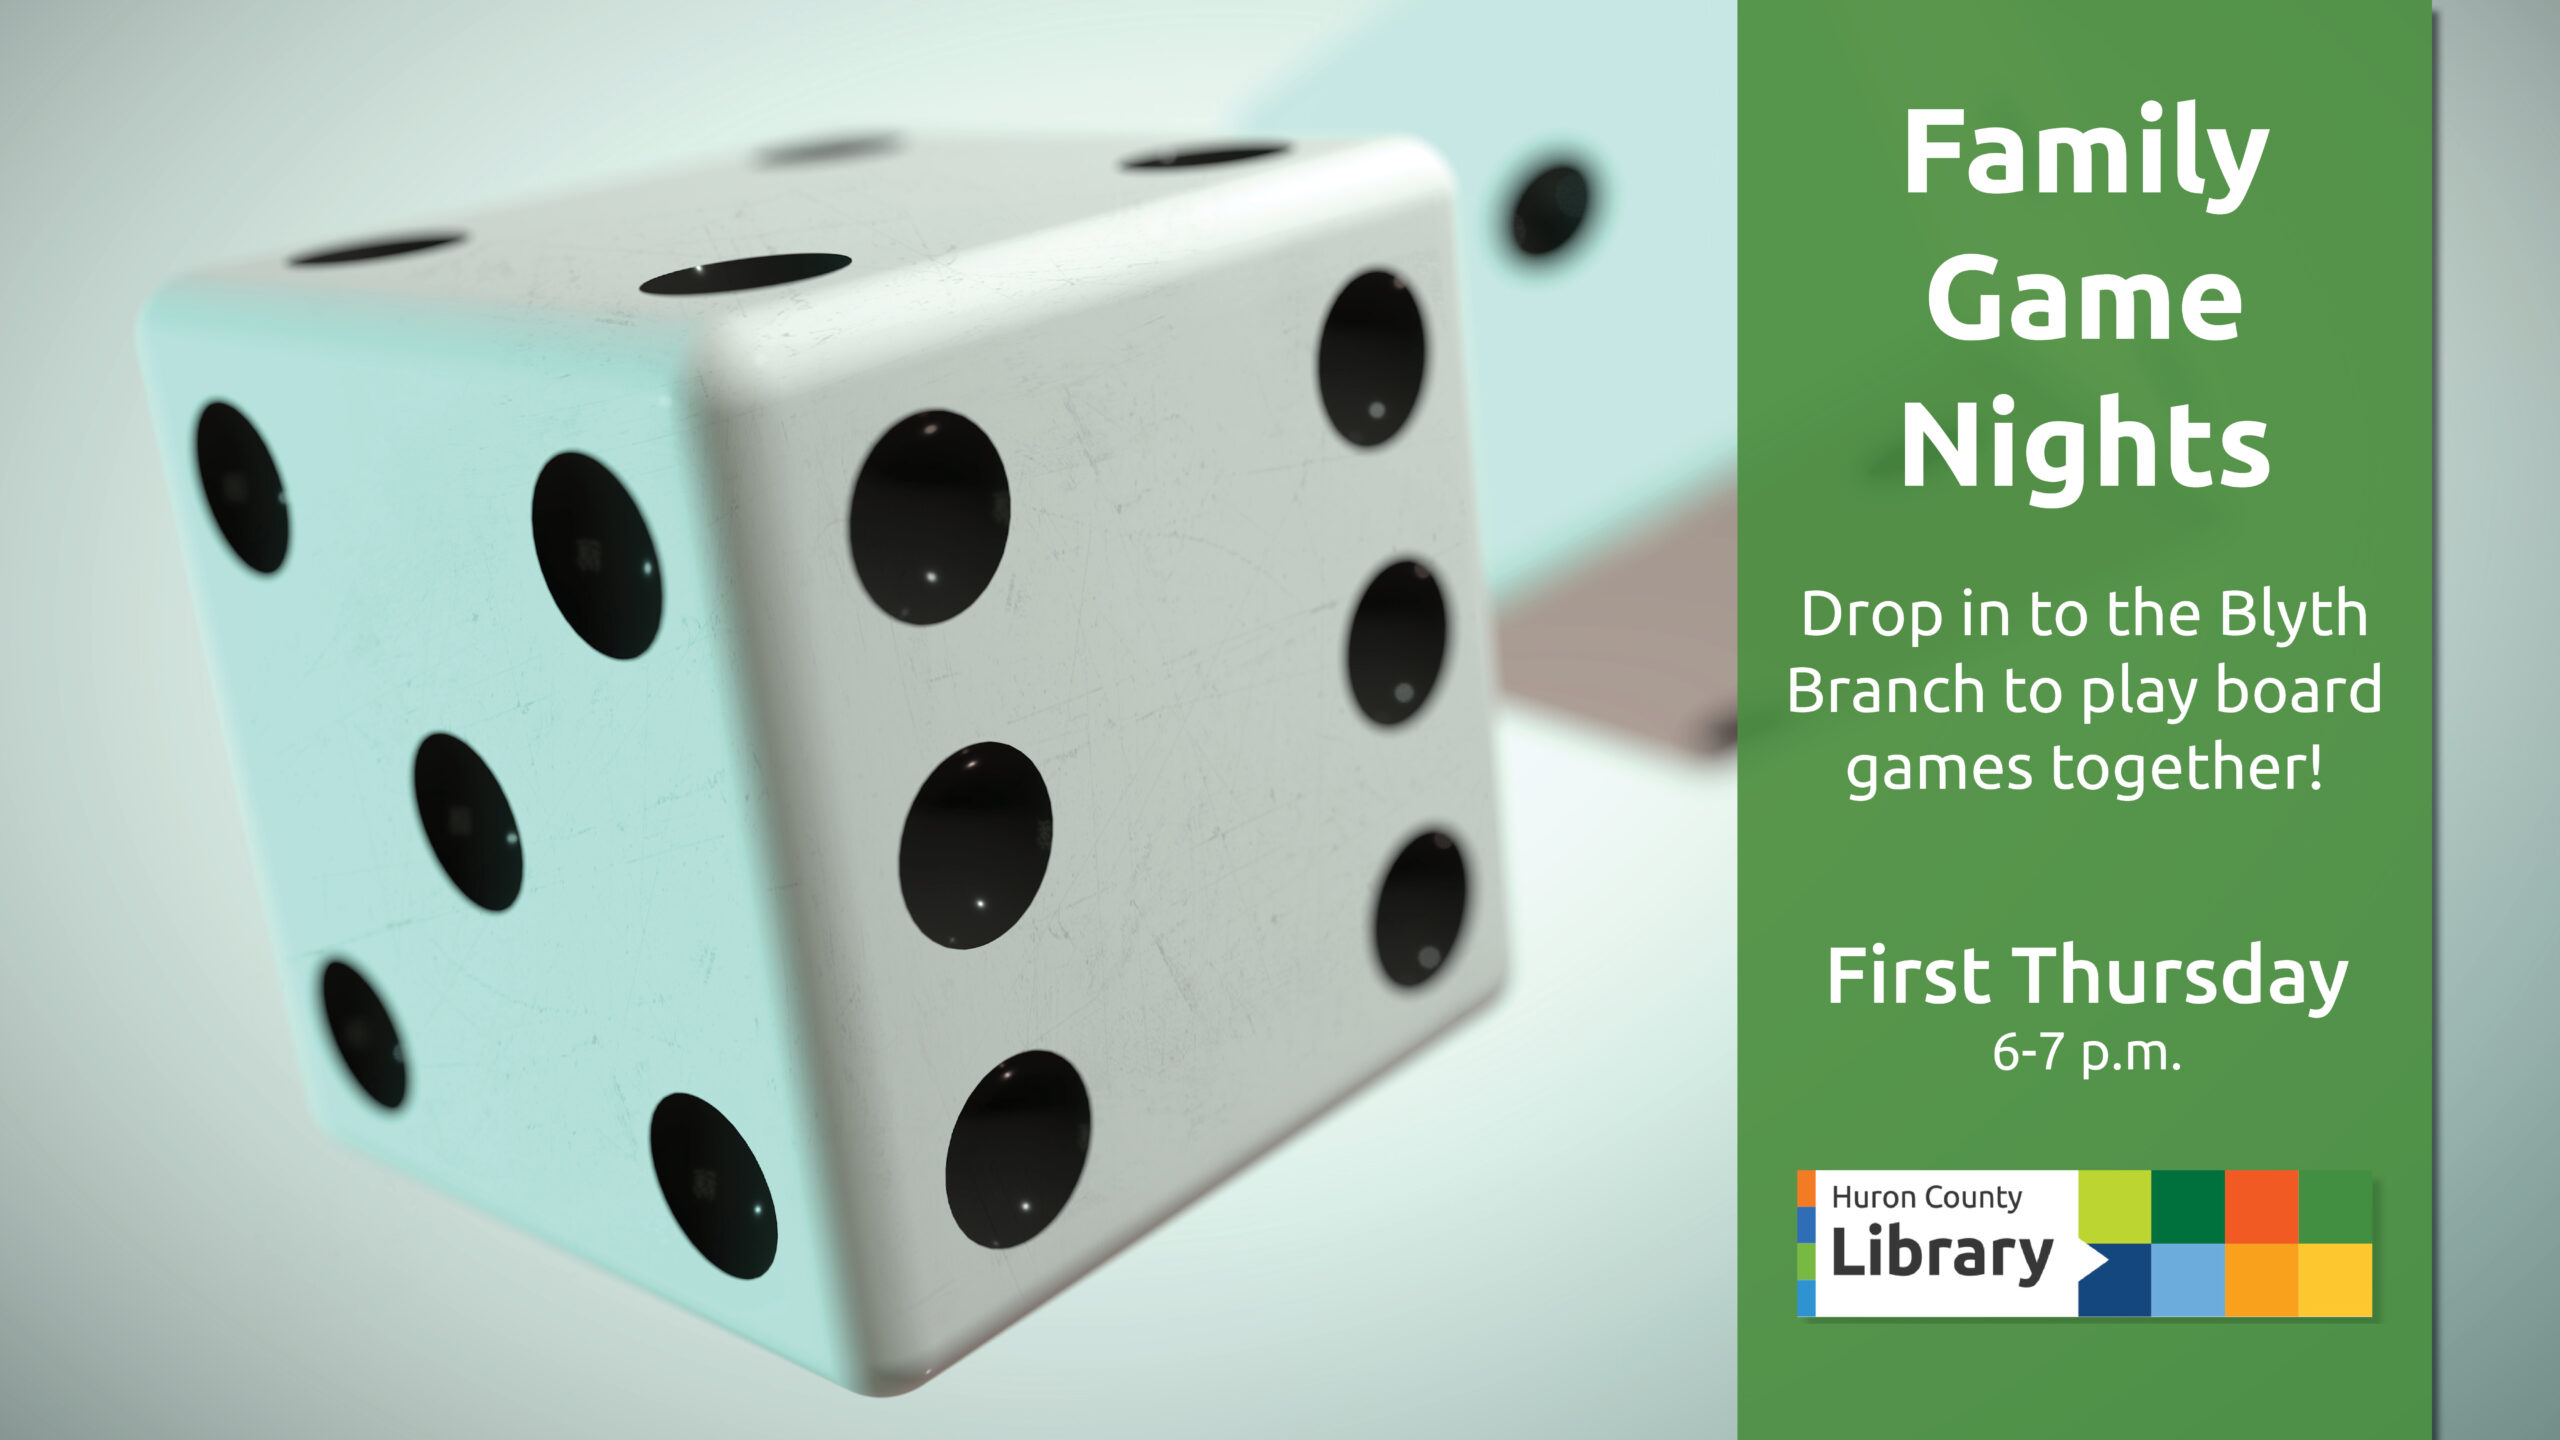 Photo of a pair of dice with text promoting family game nights at Blyth